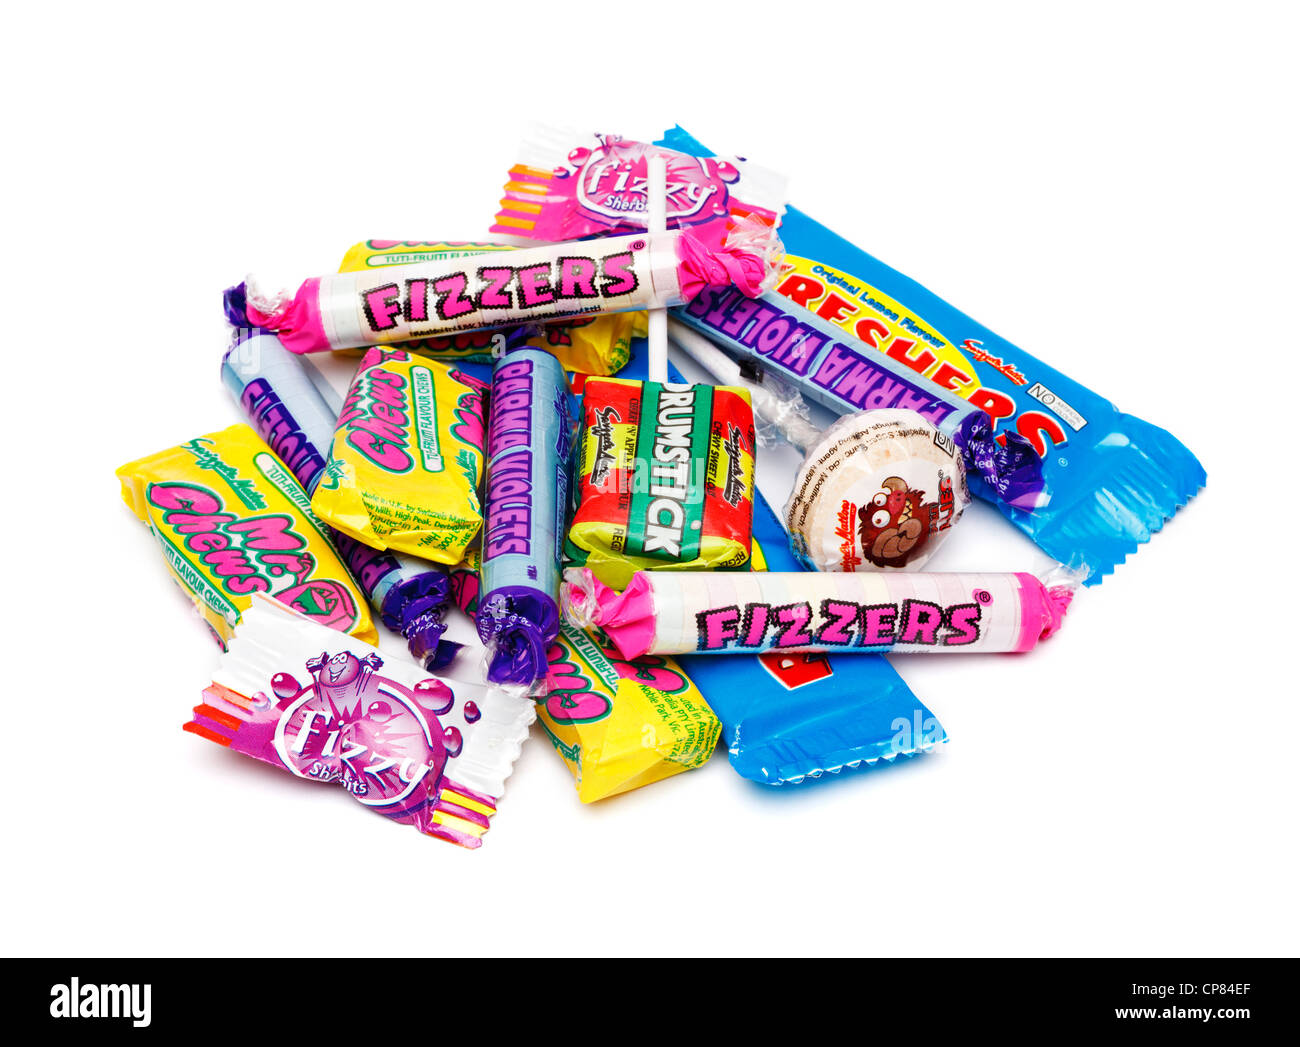 Pile of old fashioned kids sweets Stock Photo